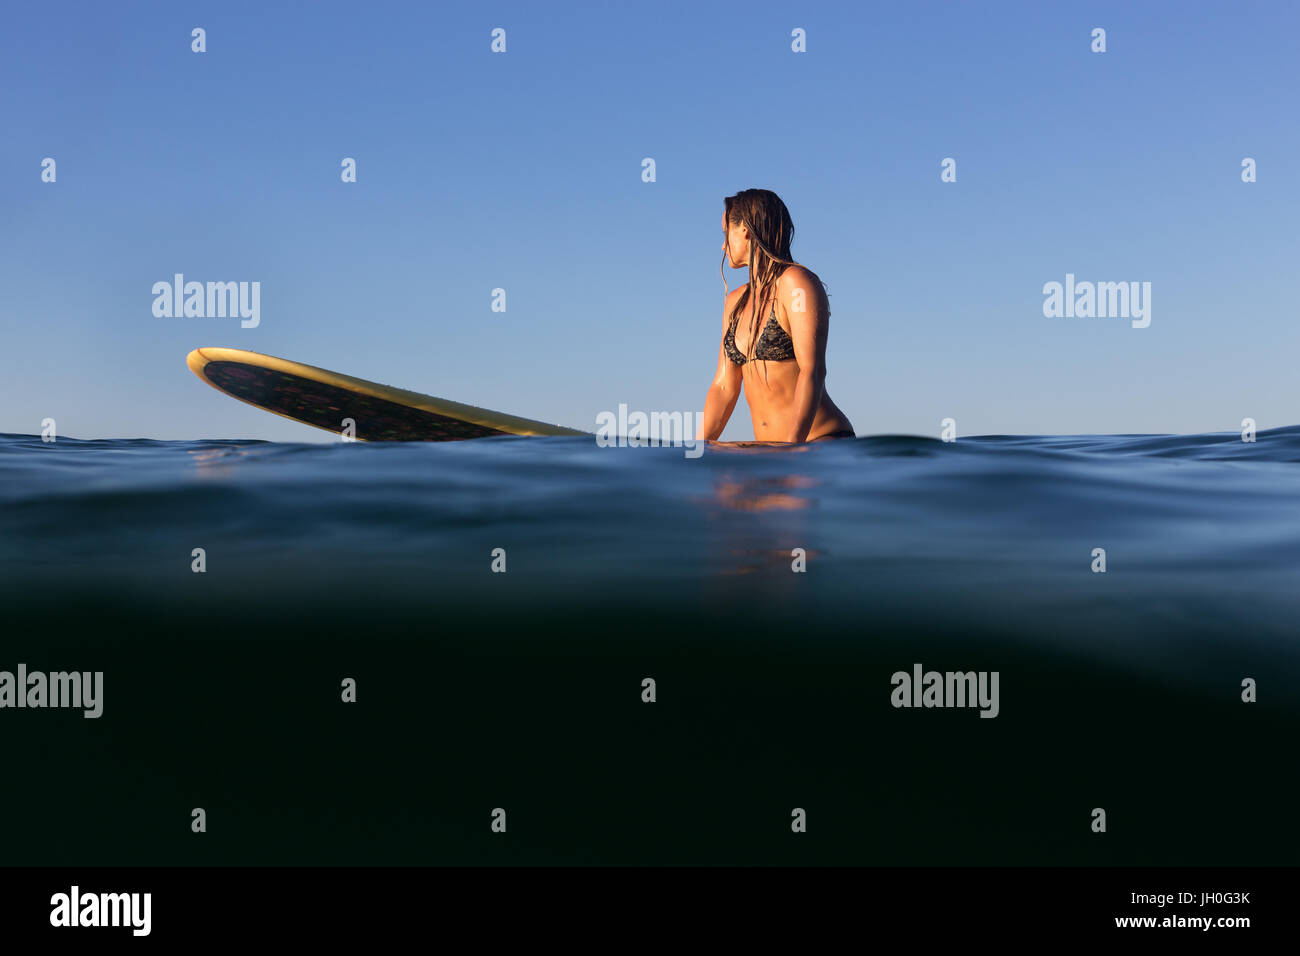 A beautiful female surfer sits on her surfboard in the evening light on the Pacific Ocean. Stock Photo